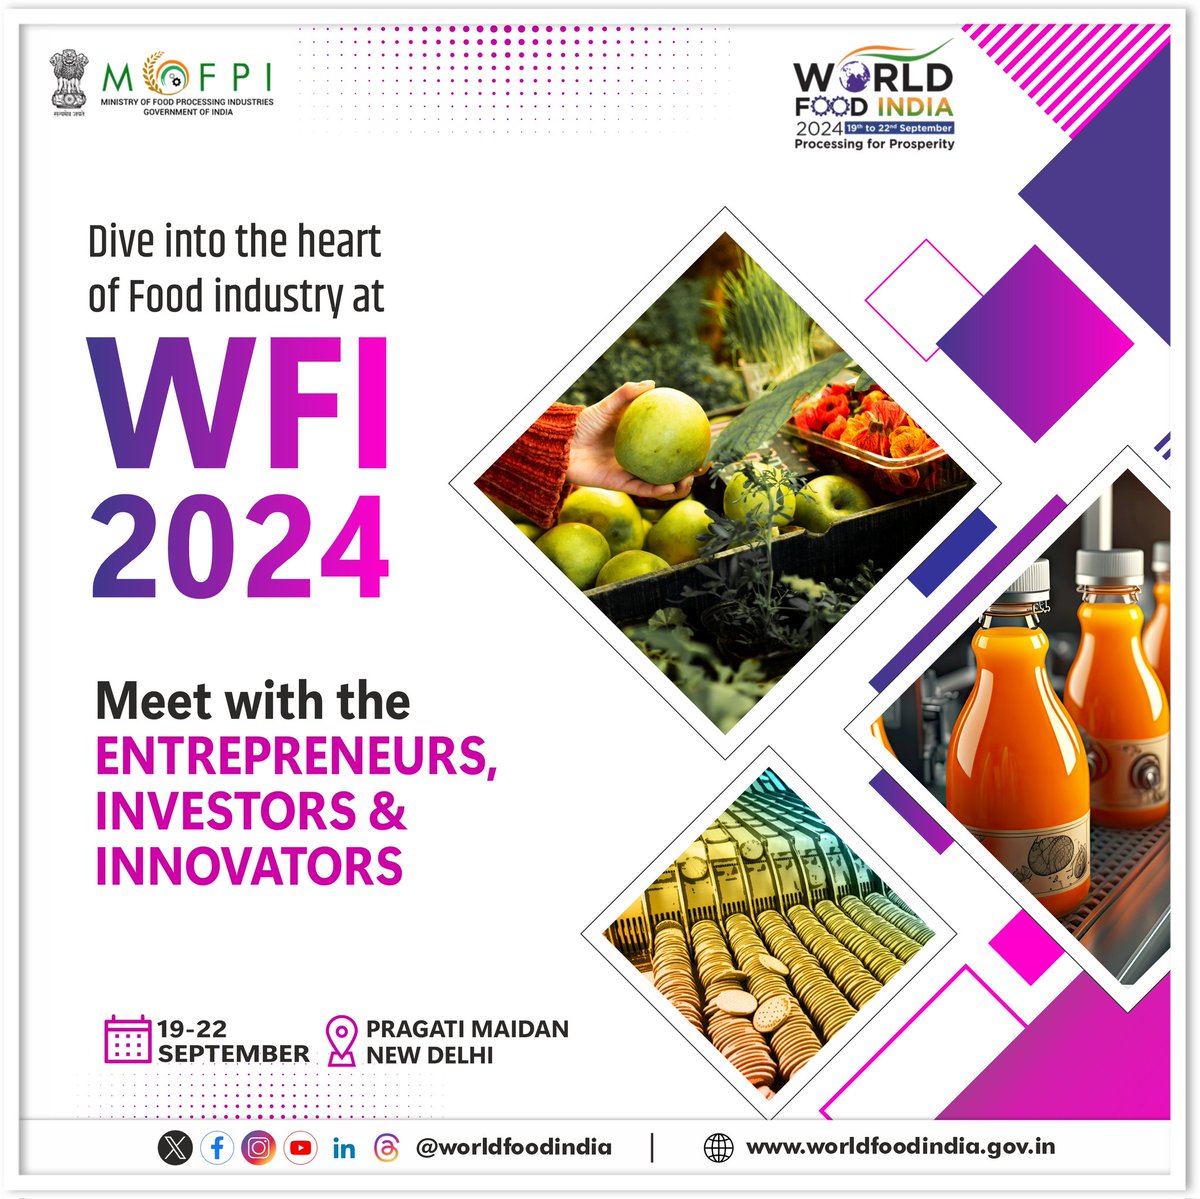 Don’t miss out the opportunity to participate in #WorldFoodIndia2024. The event will comprise of many business meetings,conferences & knowledge sessions. Reaffirm India’s position on the global food landscape, solidifying its position as a key player in international industry.